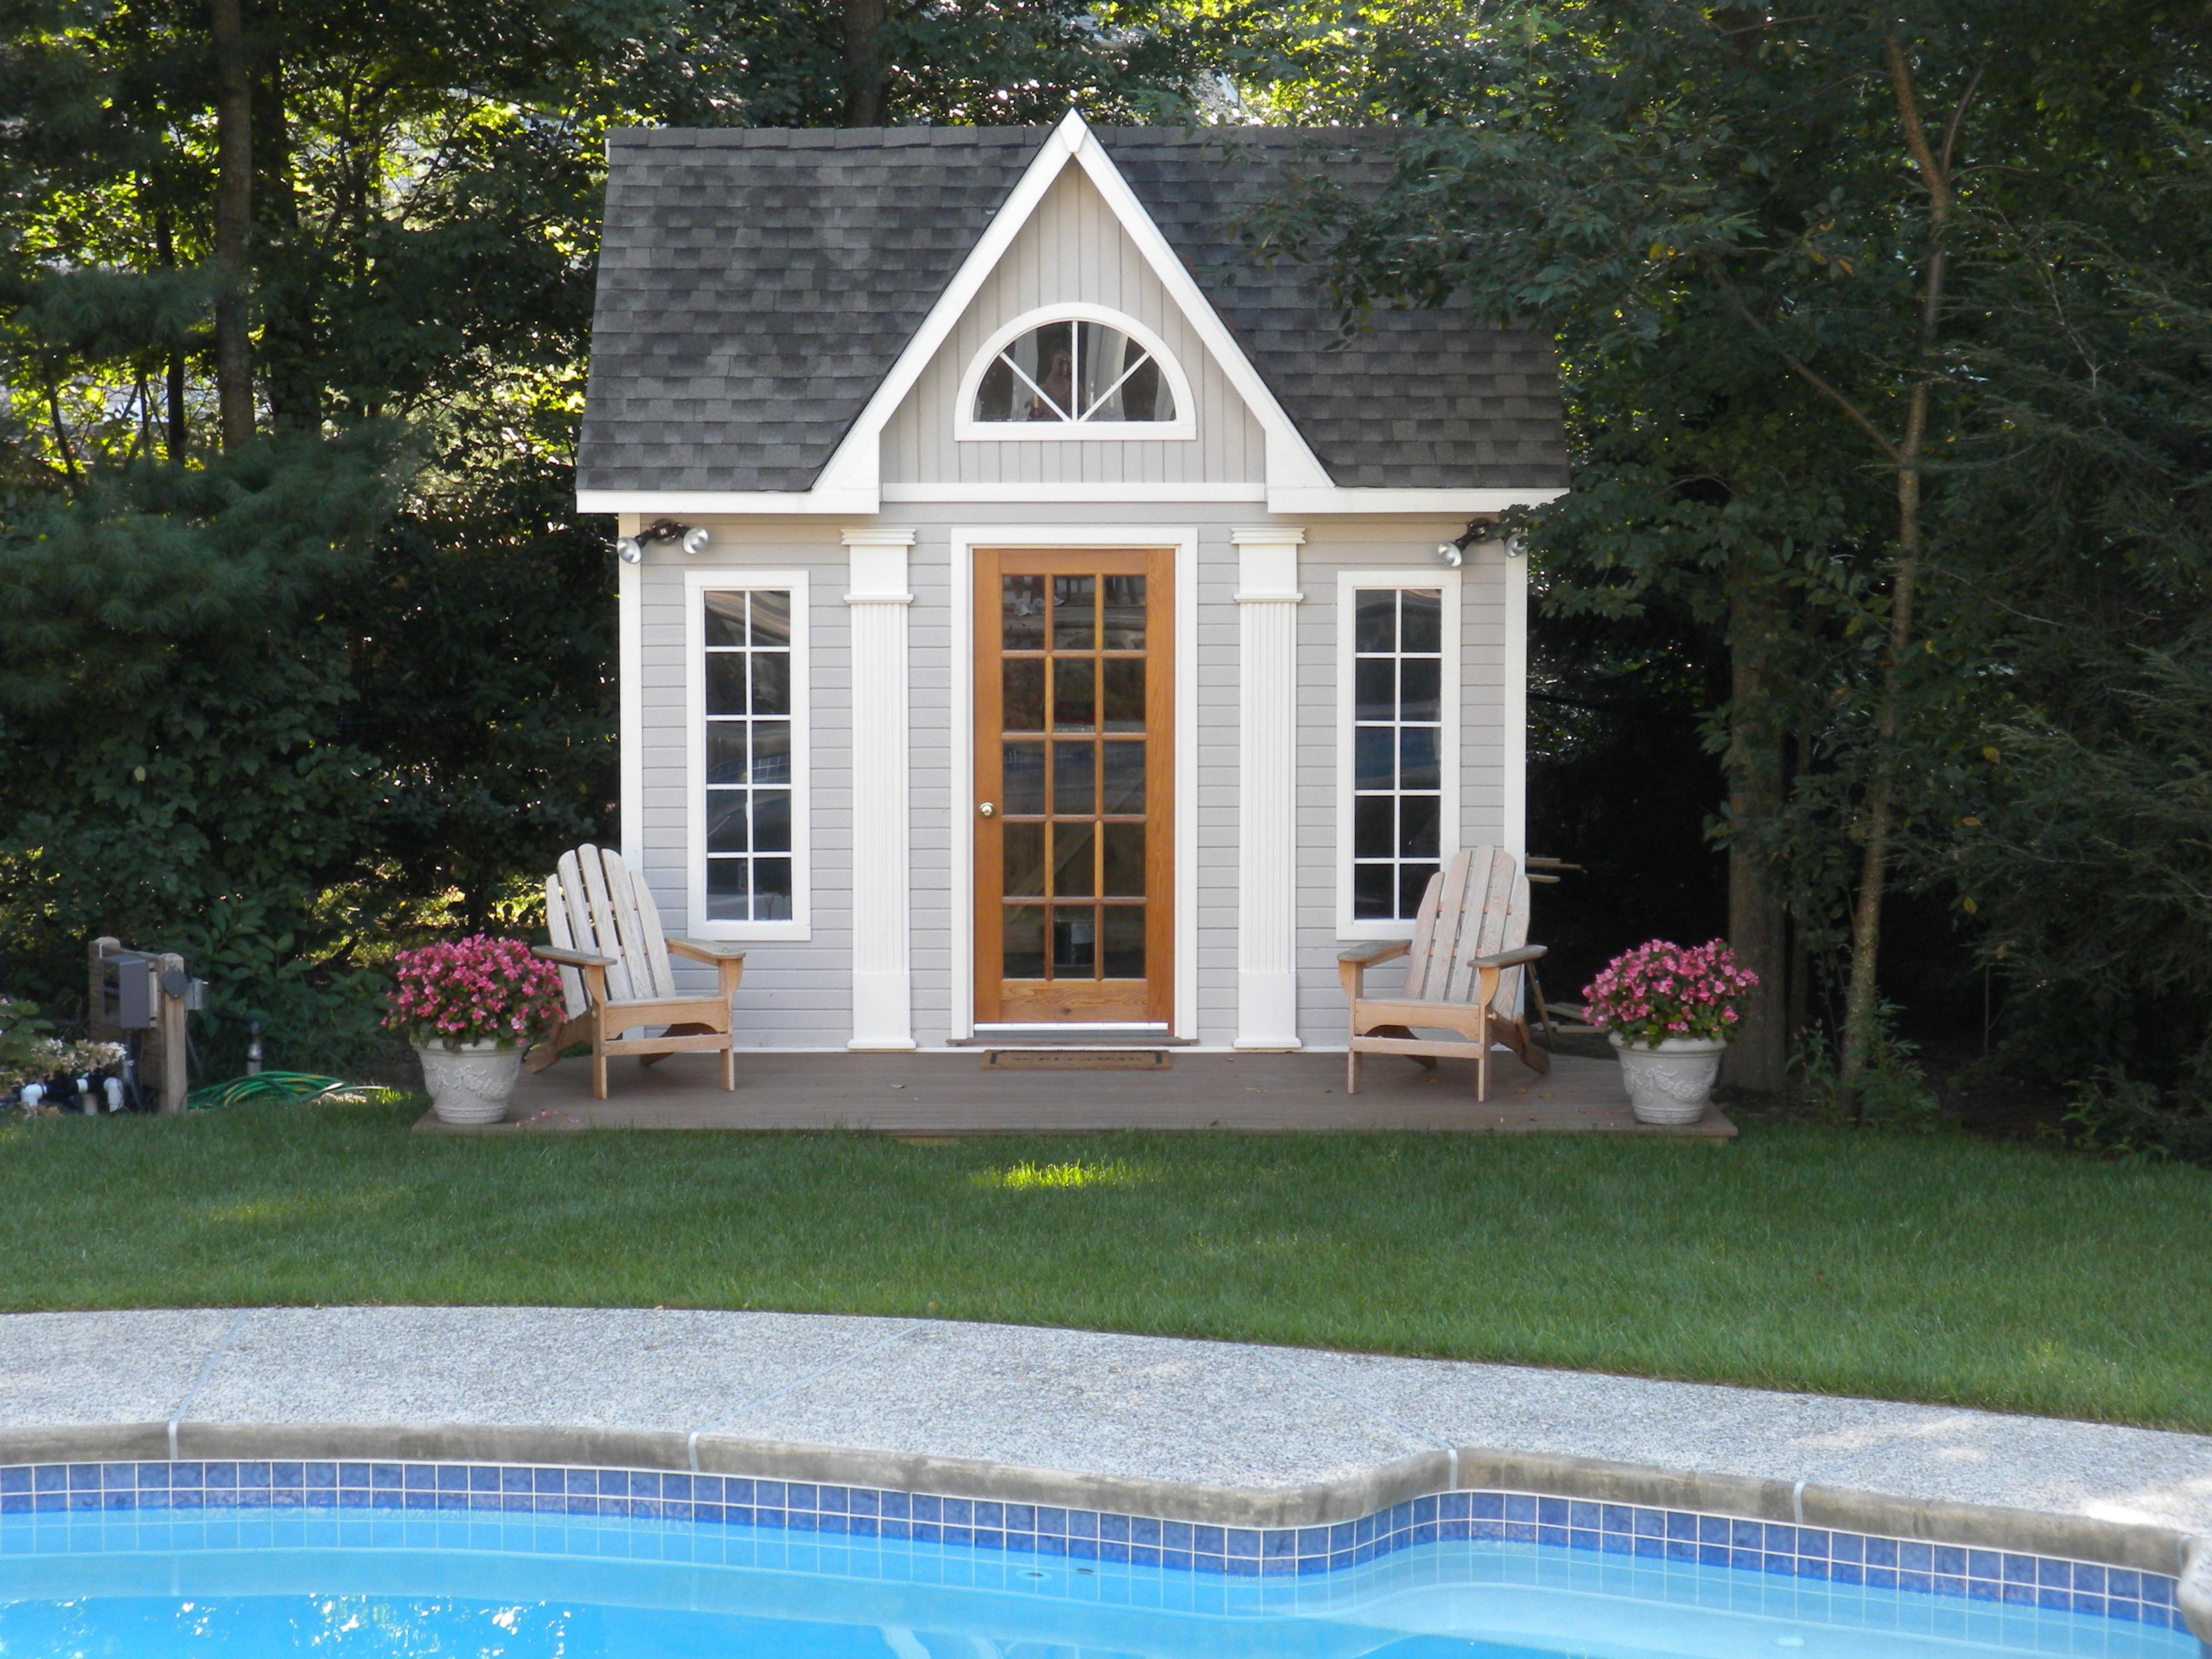 Copper Creek 10x12 workshop with arch window in Andover Massachusetts. ID number 206030-1